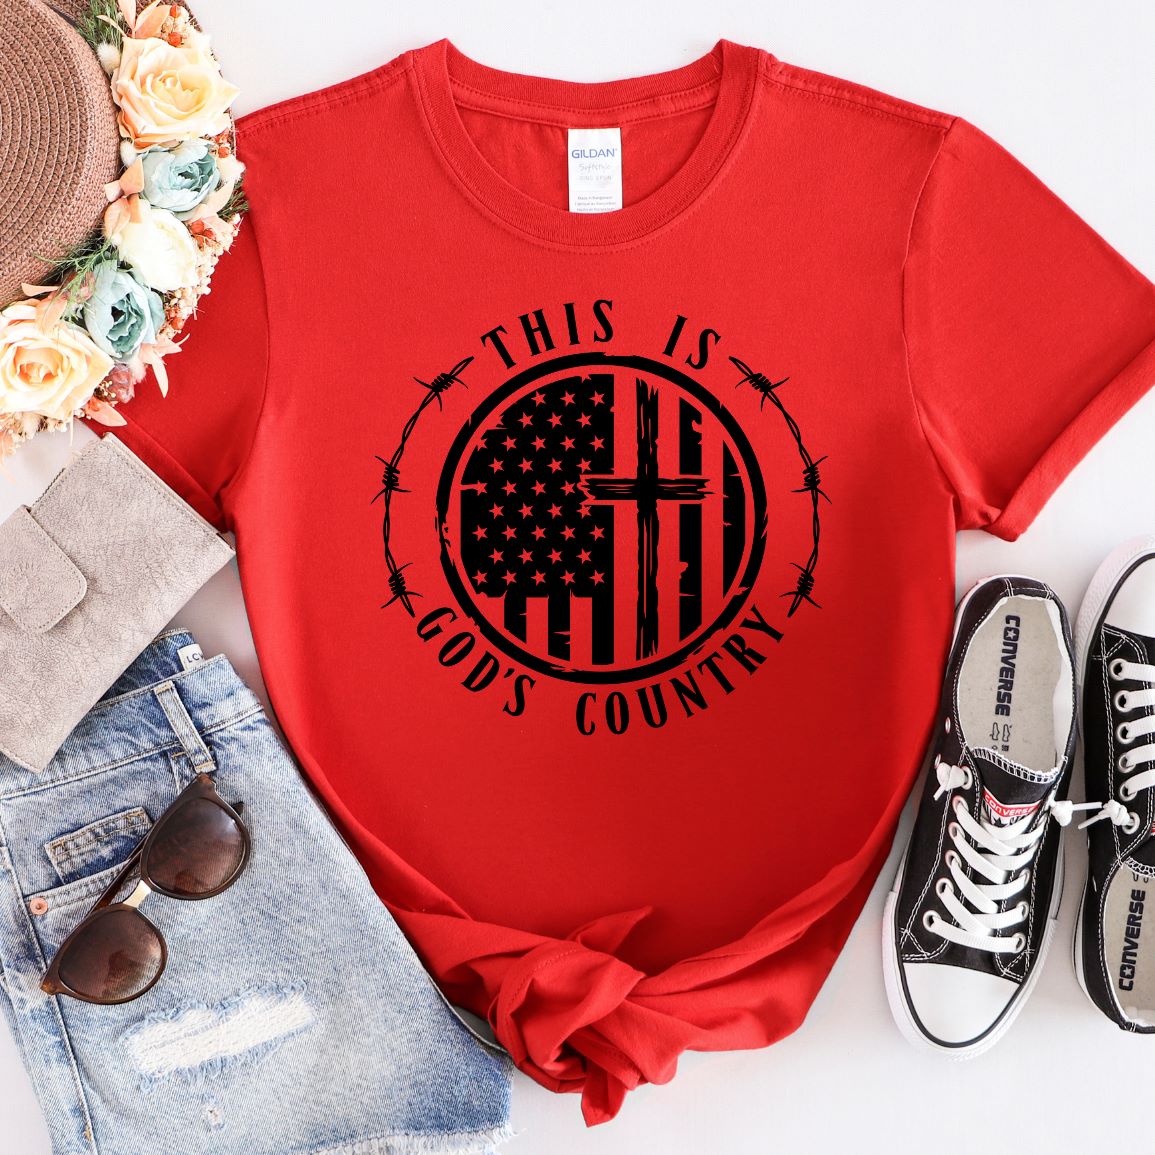 This Is God's Country T-Shirt